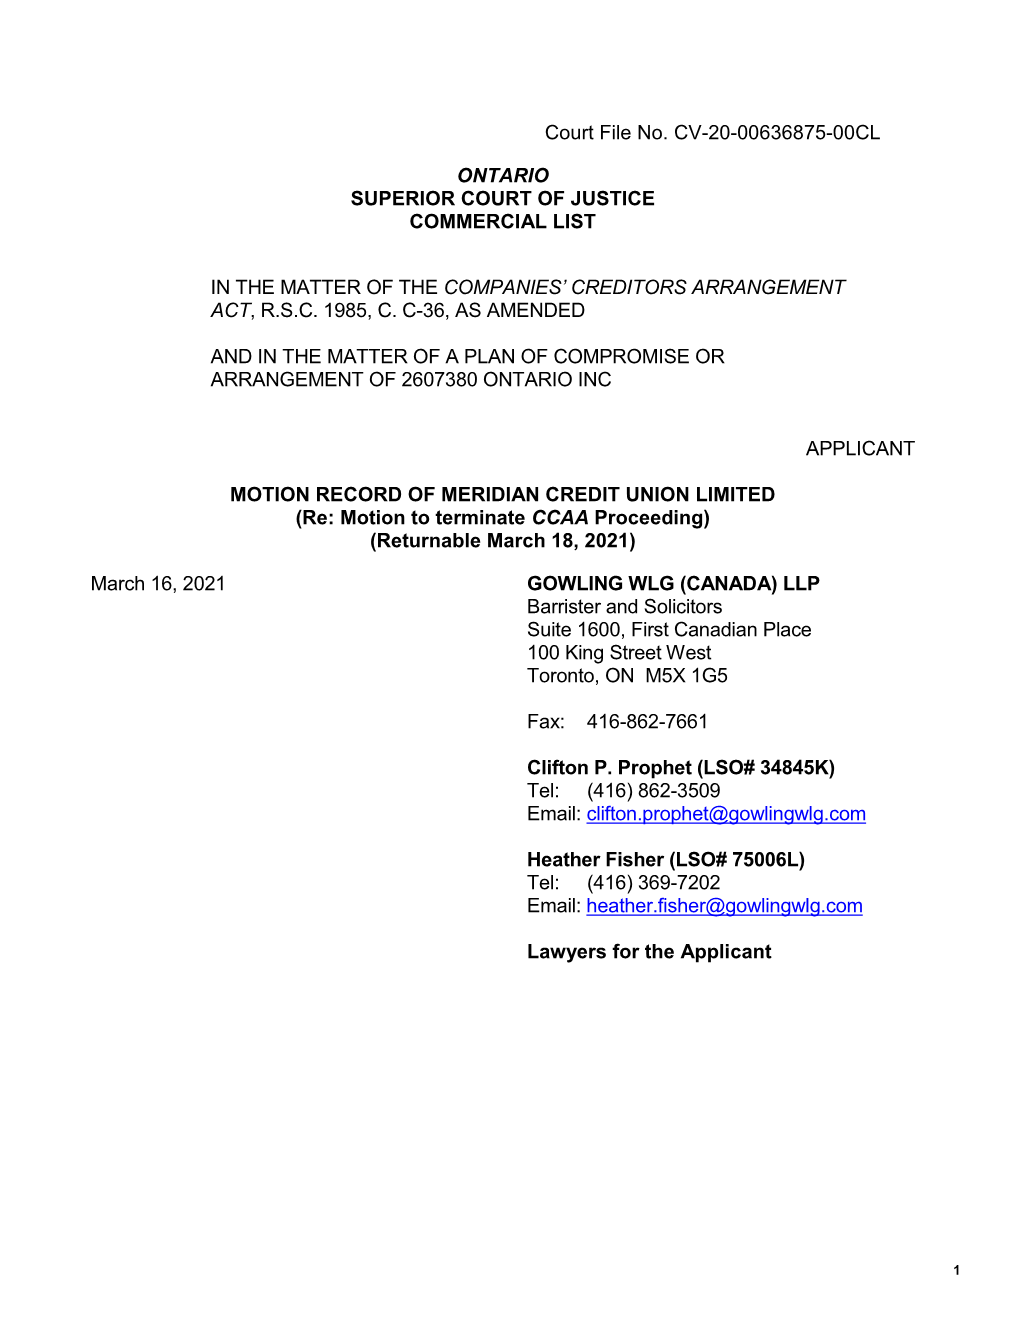 MOTION RECORD of MERIDIAN CREDIT UNION LIMITED (Re: Motion to Terminate CCAA Proceeding) (Returnable March 18, 2021)